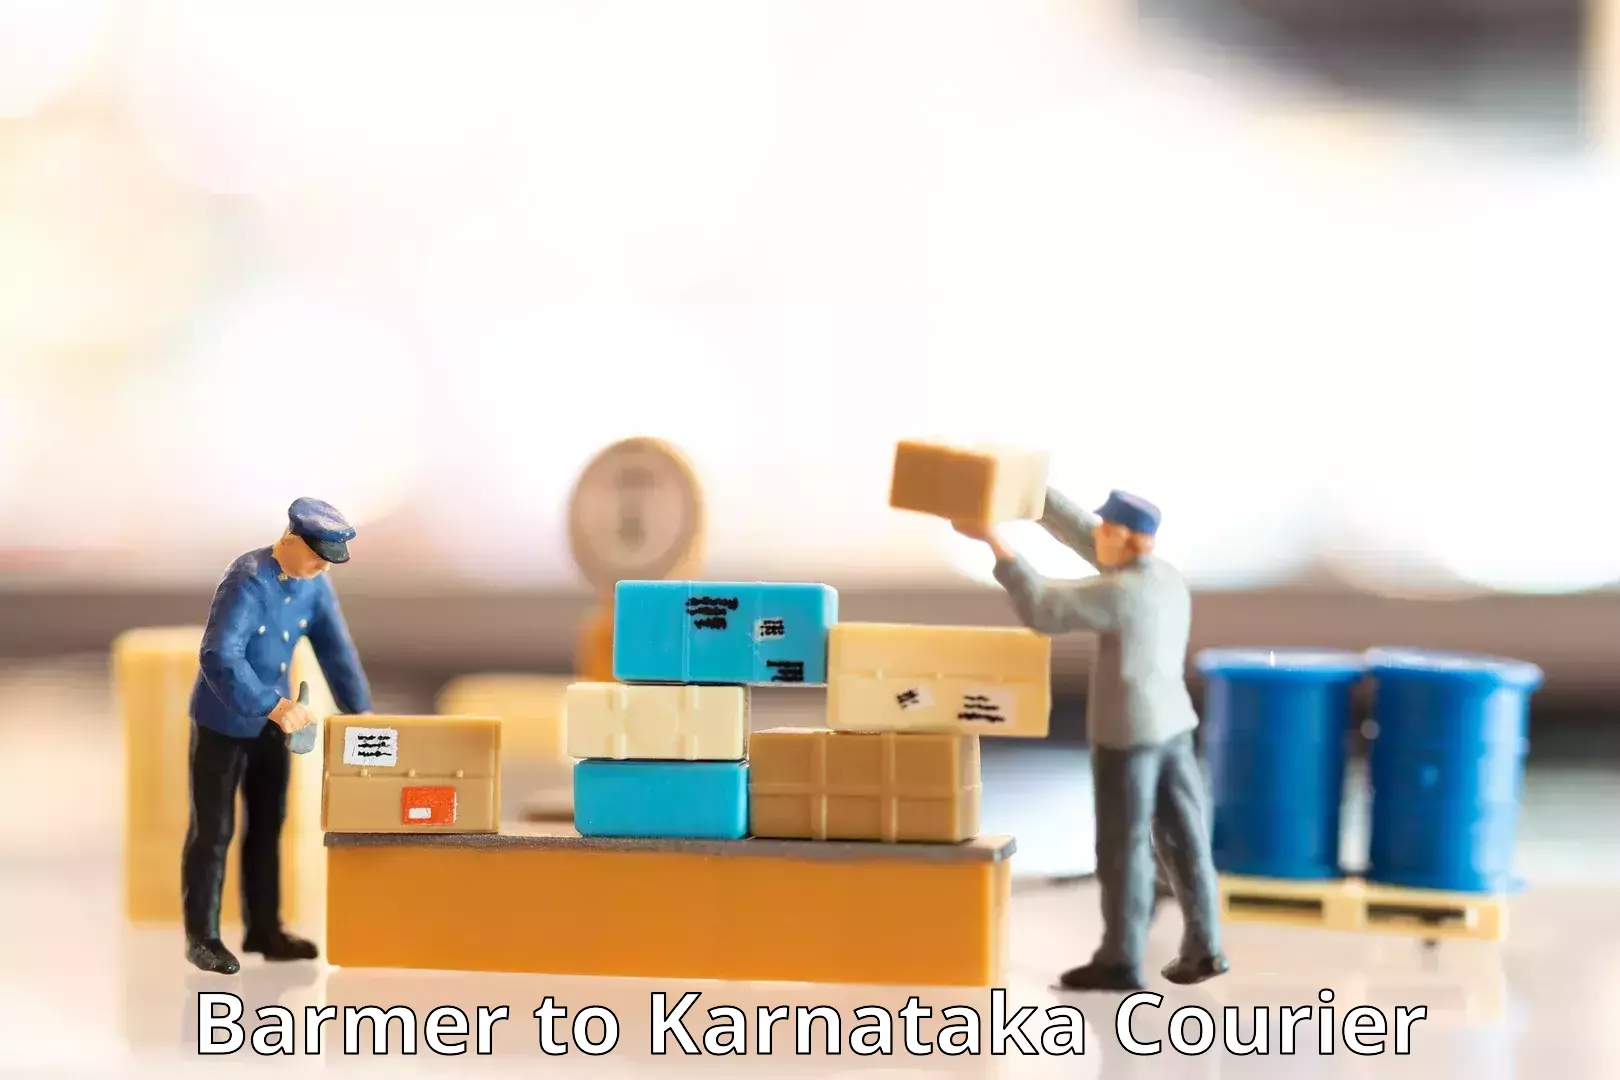 State-of-the-art courier technology Barmer to NITTE Mangaluru